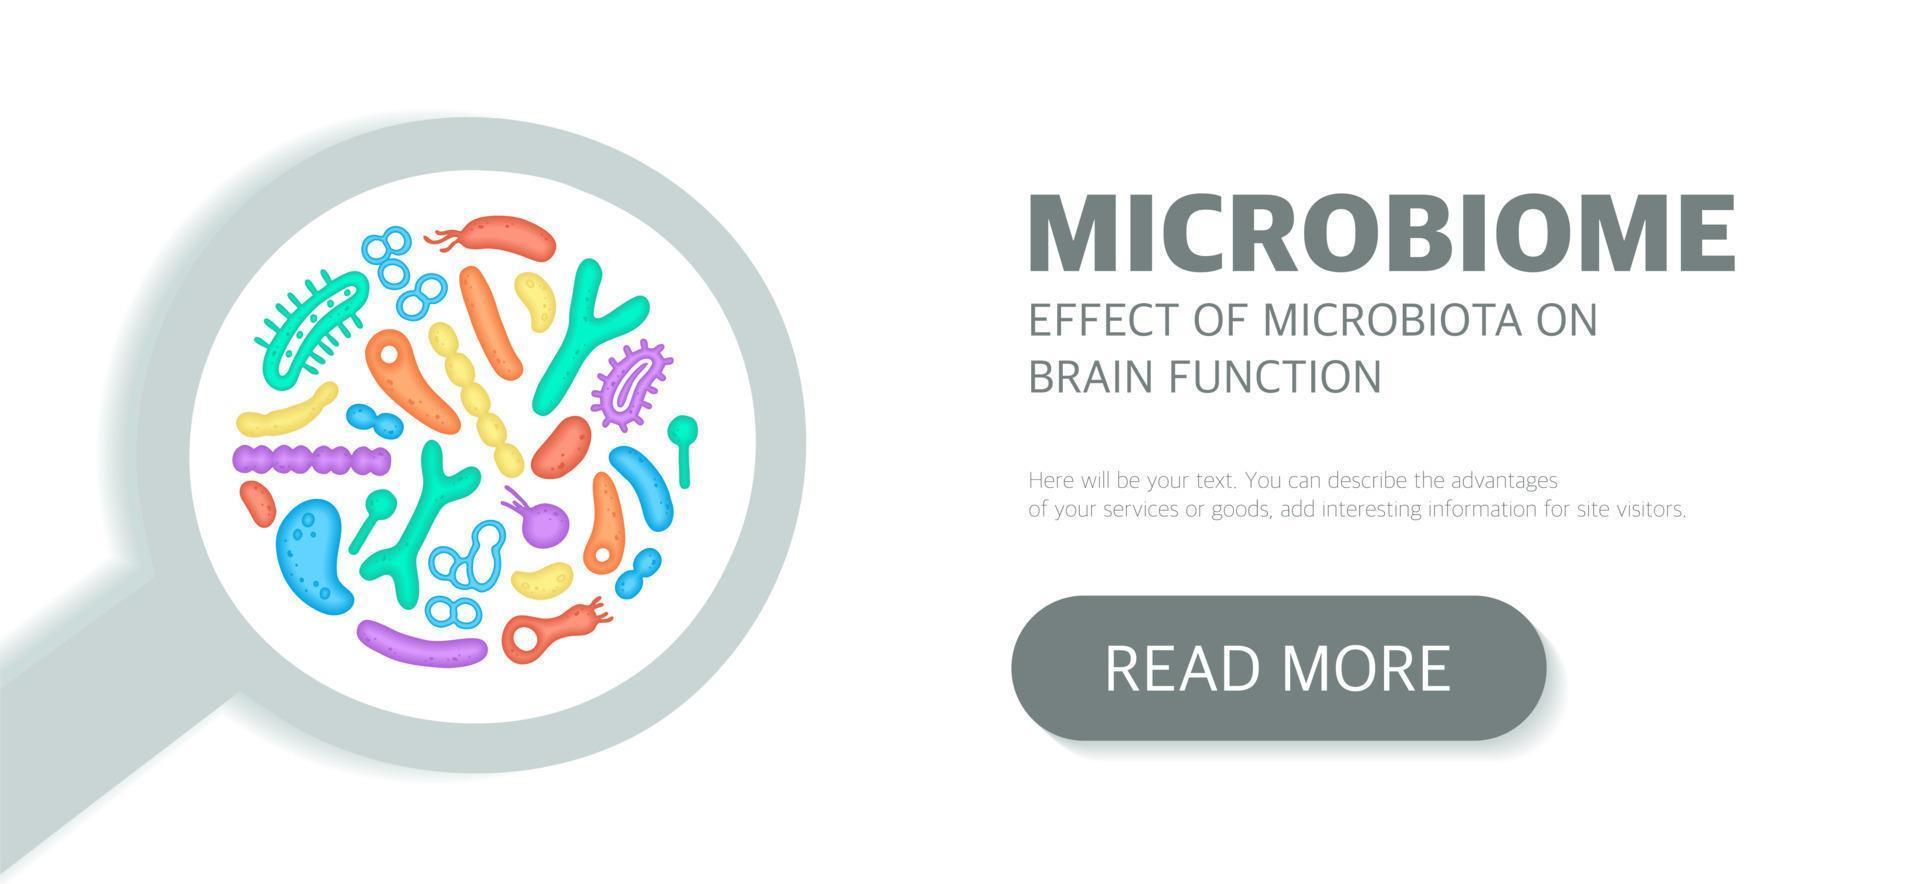 Microbiome website landing page template, newsletter, advertising, label, presentation. Vector background with bacteria.